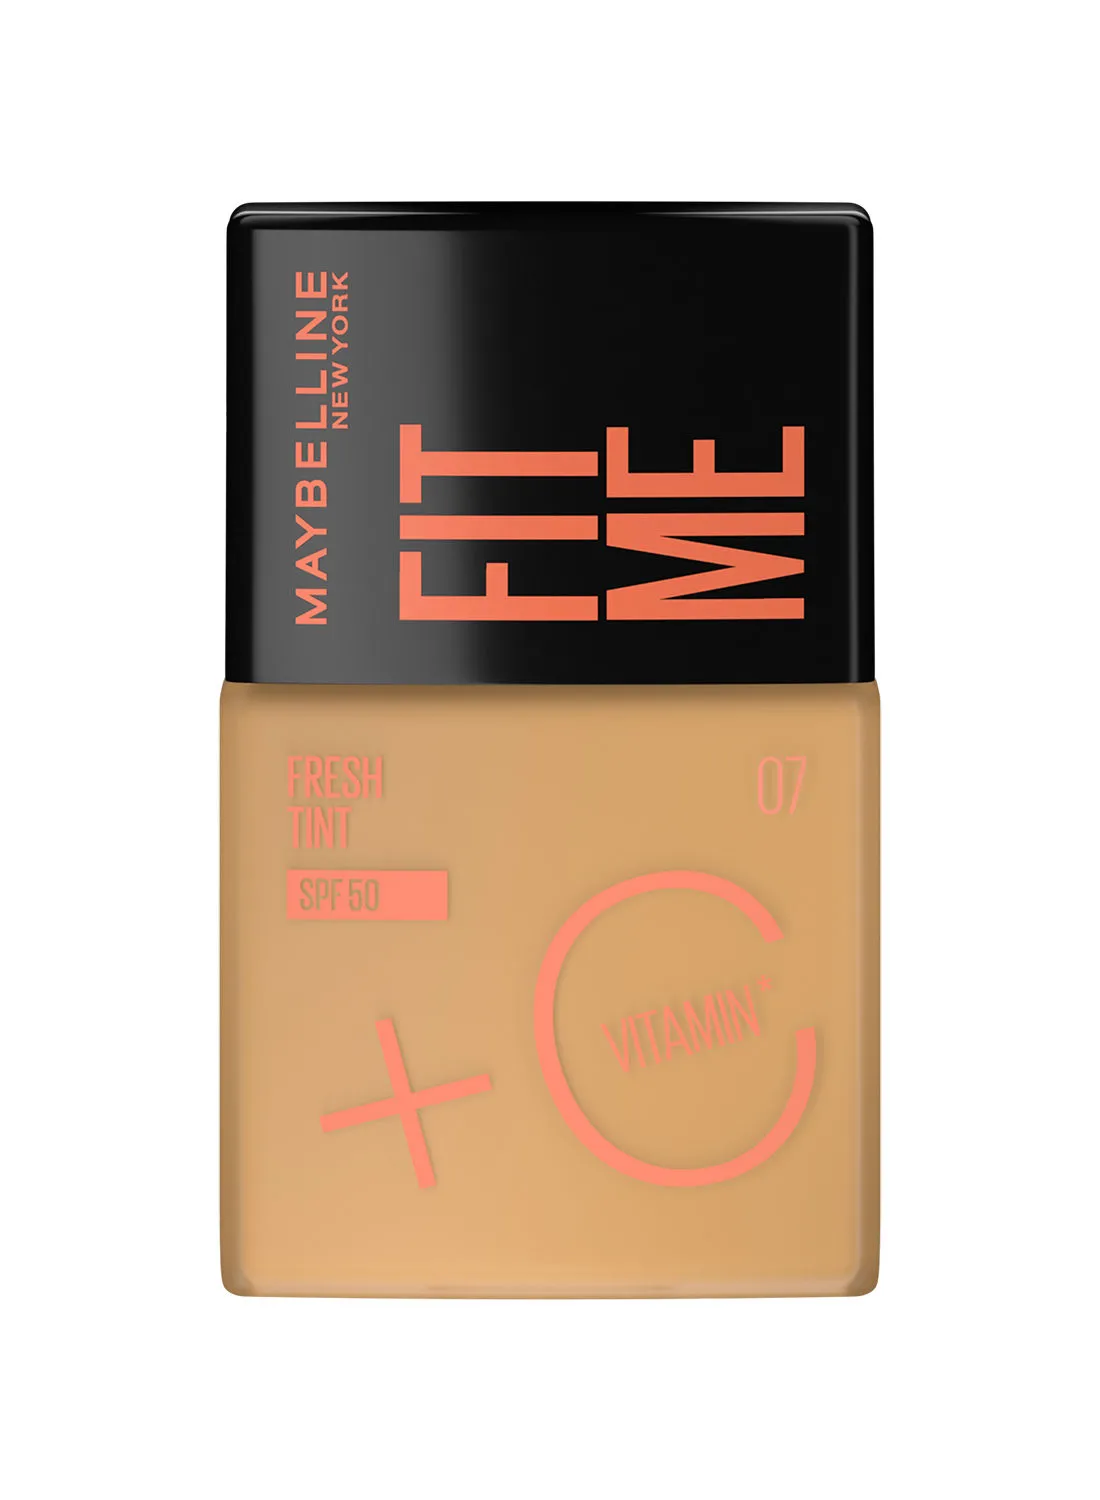 MAYBELLINE NEW YORK Maybelline New York, Fit Me Fresh Tint SPF 50 with Brightening Vitamin C, 07